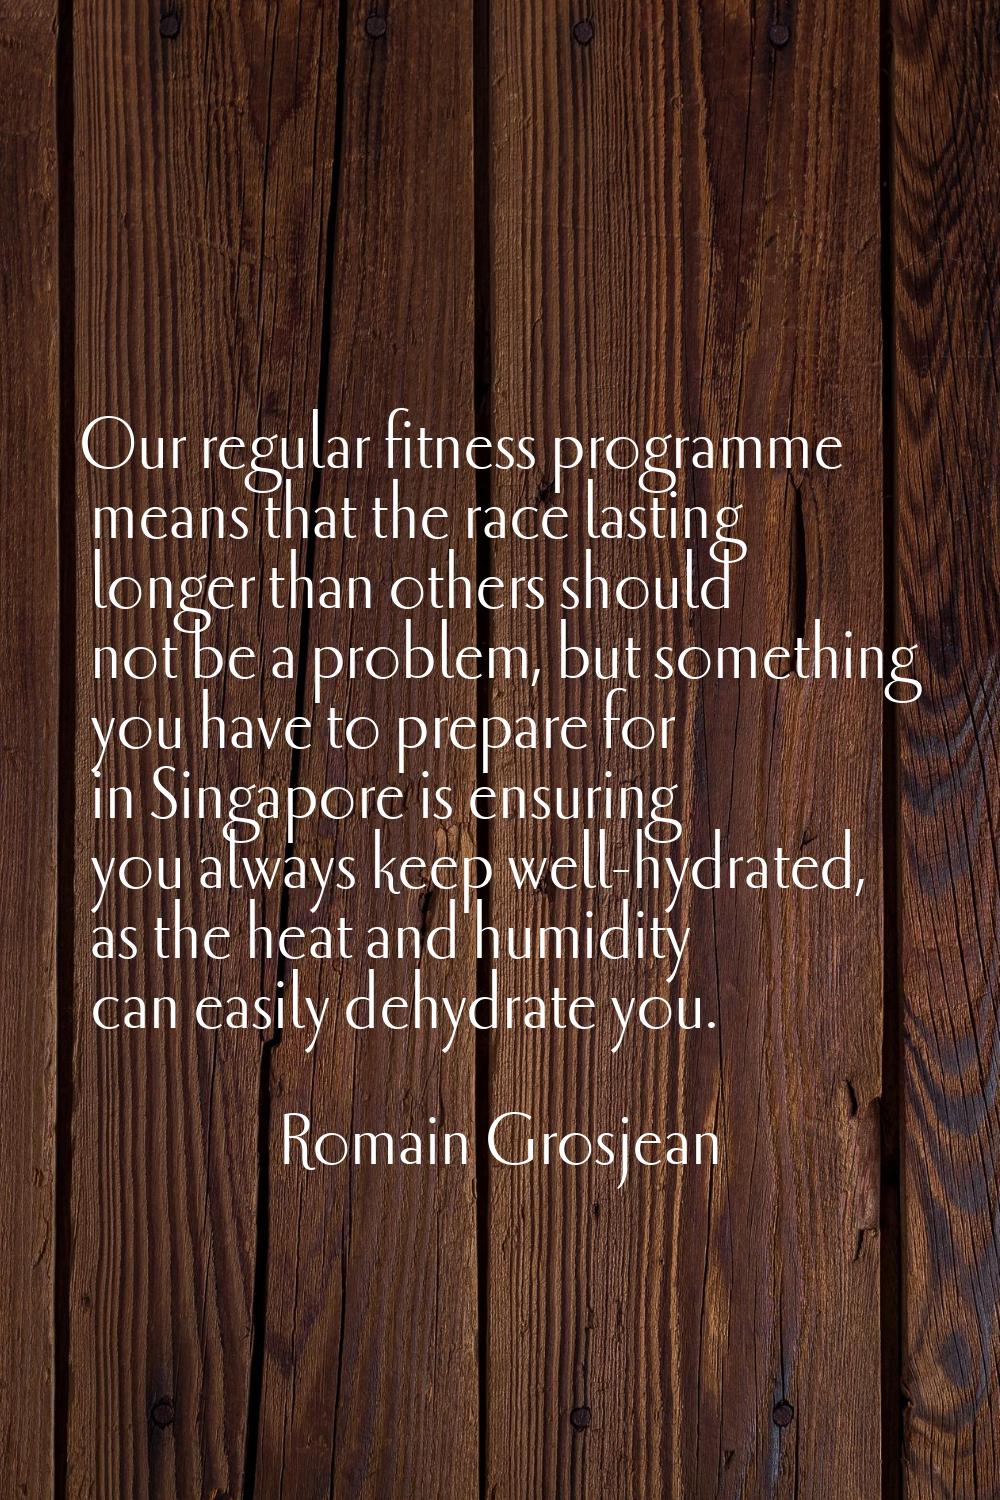 Our regular fitness programme means that the race lasting longer than others should not be a proble